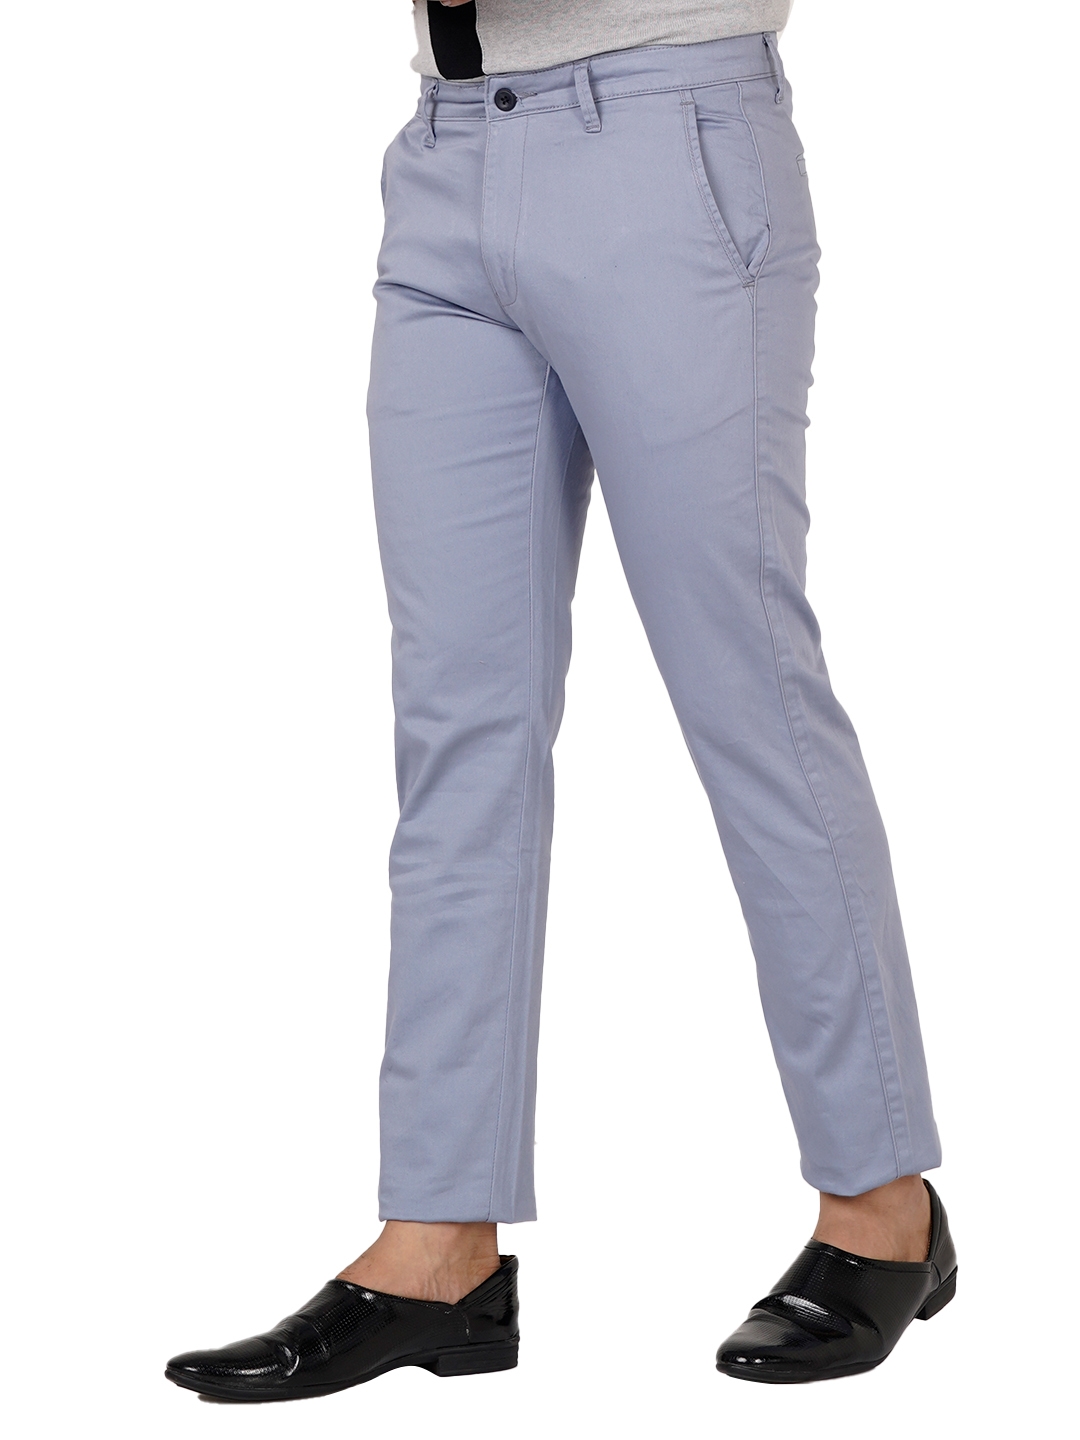 D'cot by Donear | D'cot by Donear Men's Blue Cotton Trousers 1